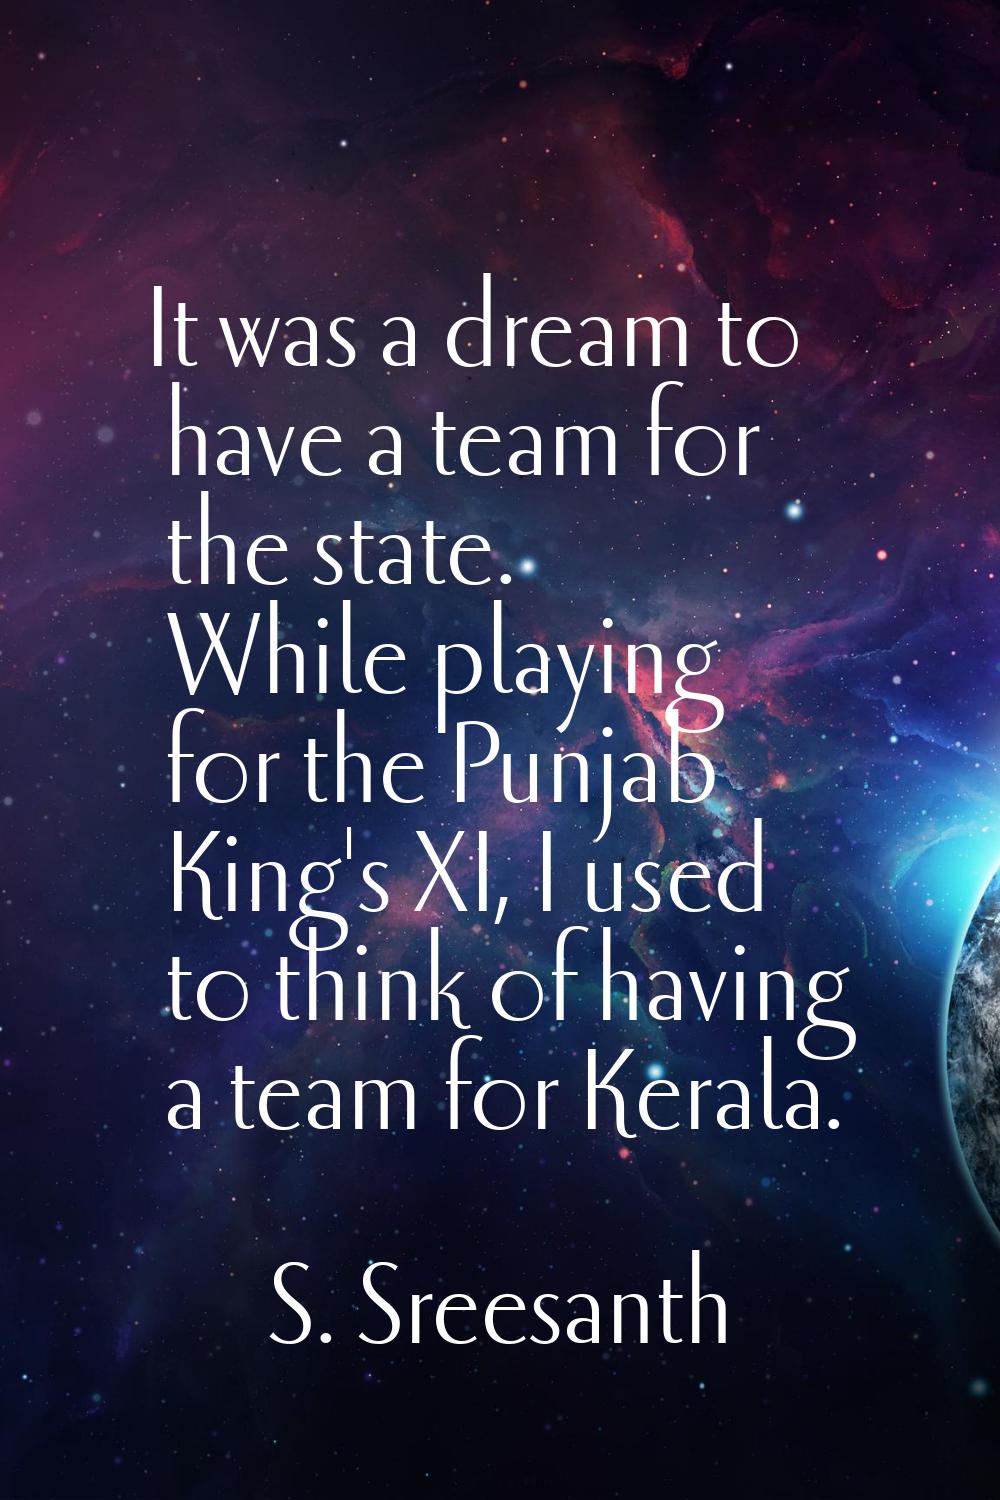 It was a dream to have a team for the state. While playing for the Punjab King's XI, I used to thin